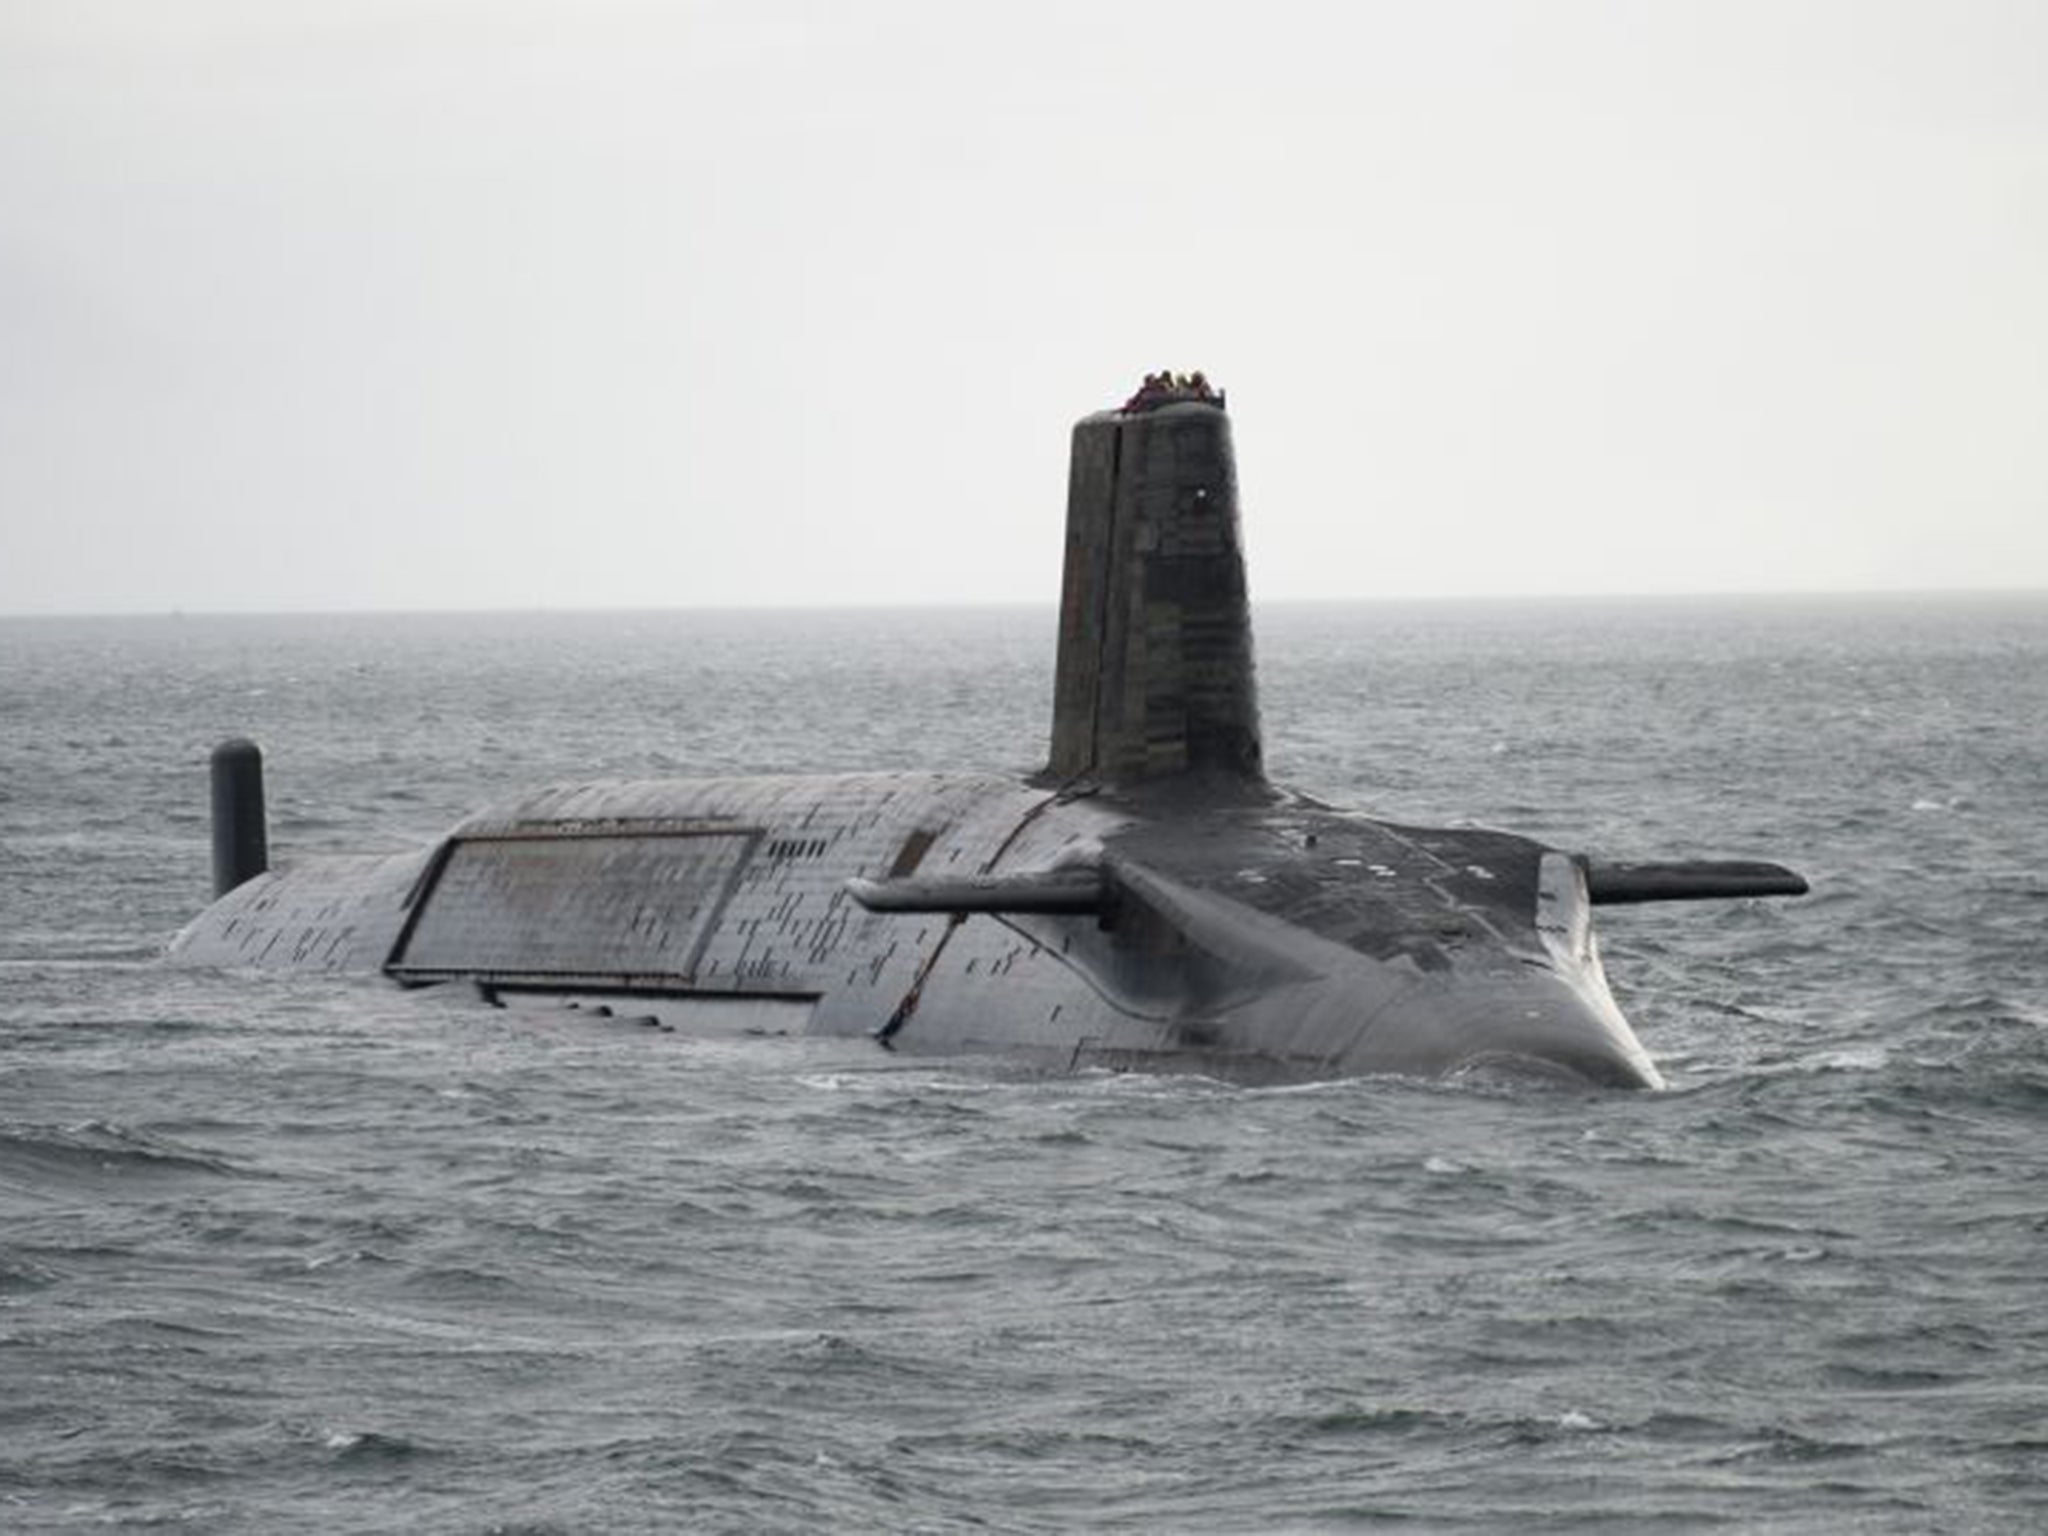 The vote on Trident’s successor in April will expose Labour divisions